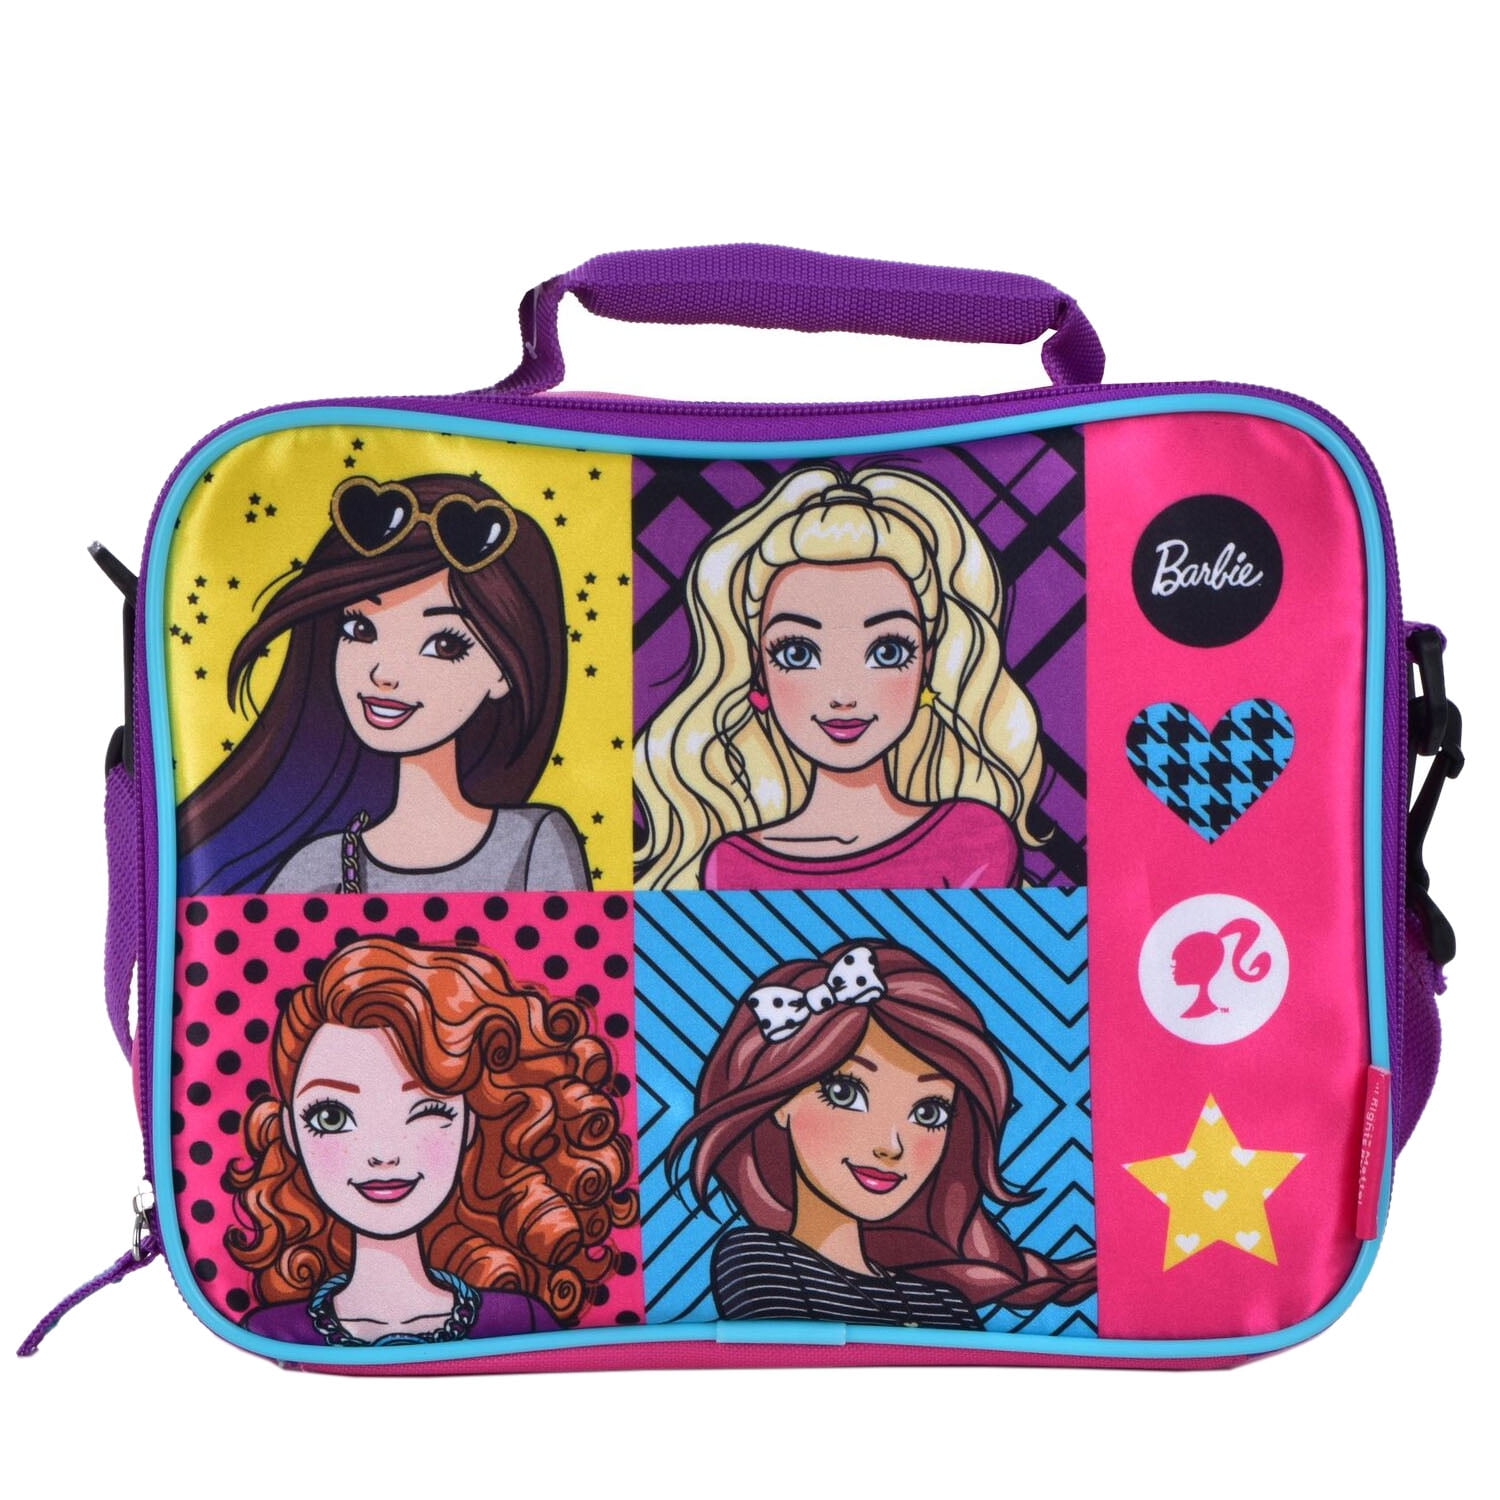 Barbie, Accessories, Thermos 25 Barbie Soft Lunch Box